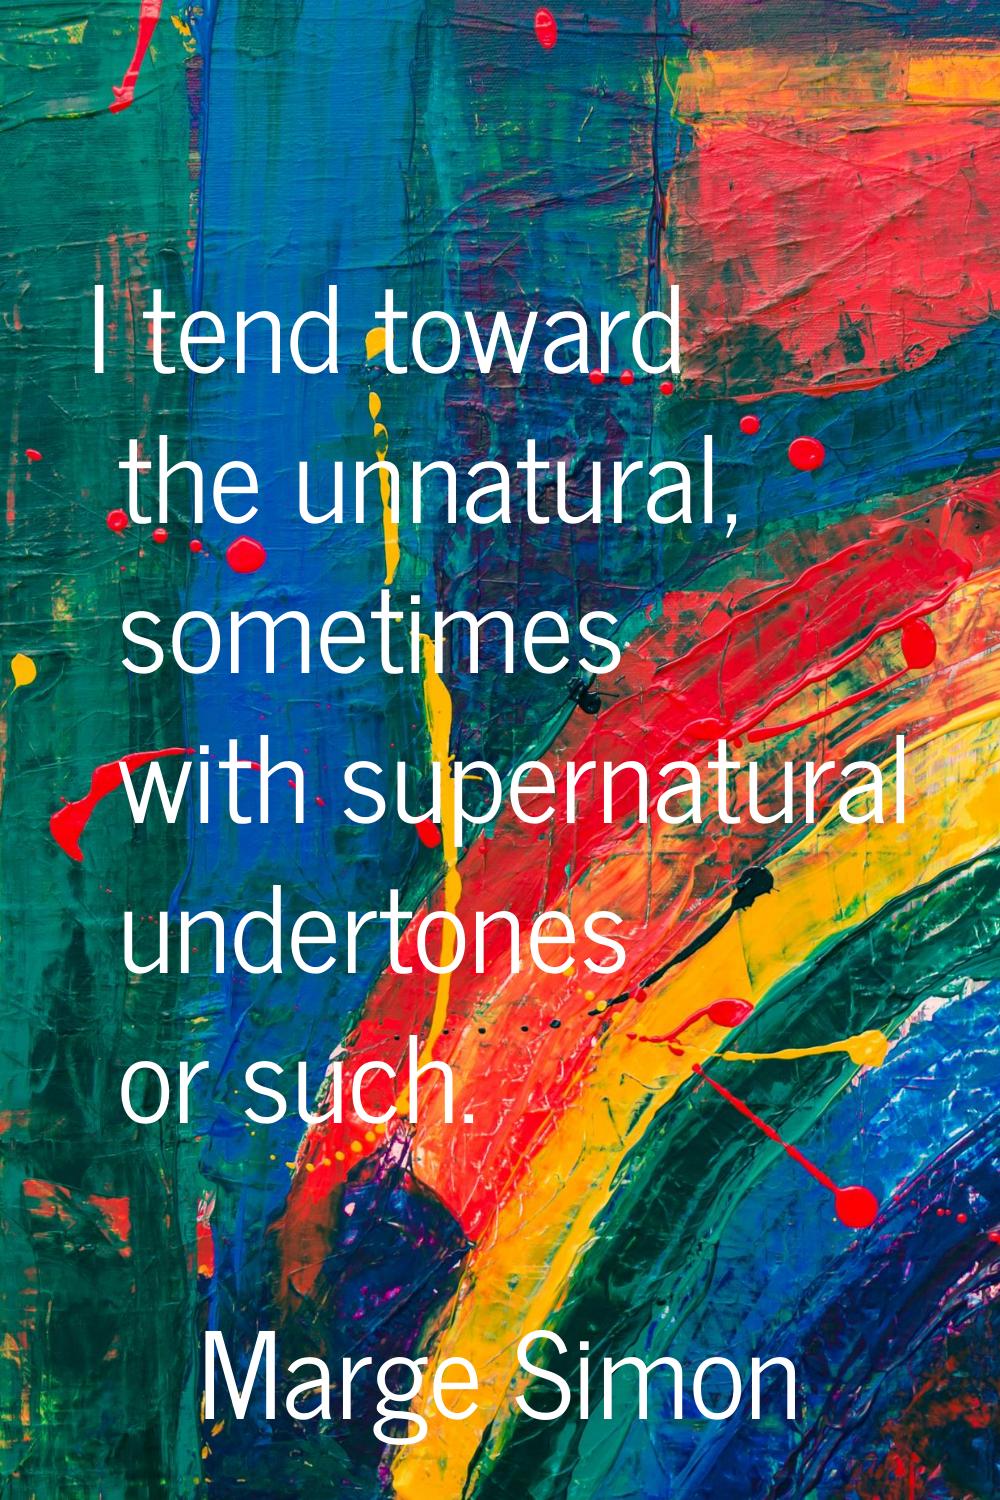 I tend toward the unnatural, sometimes with supernatural undertones or such.